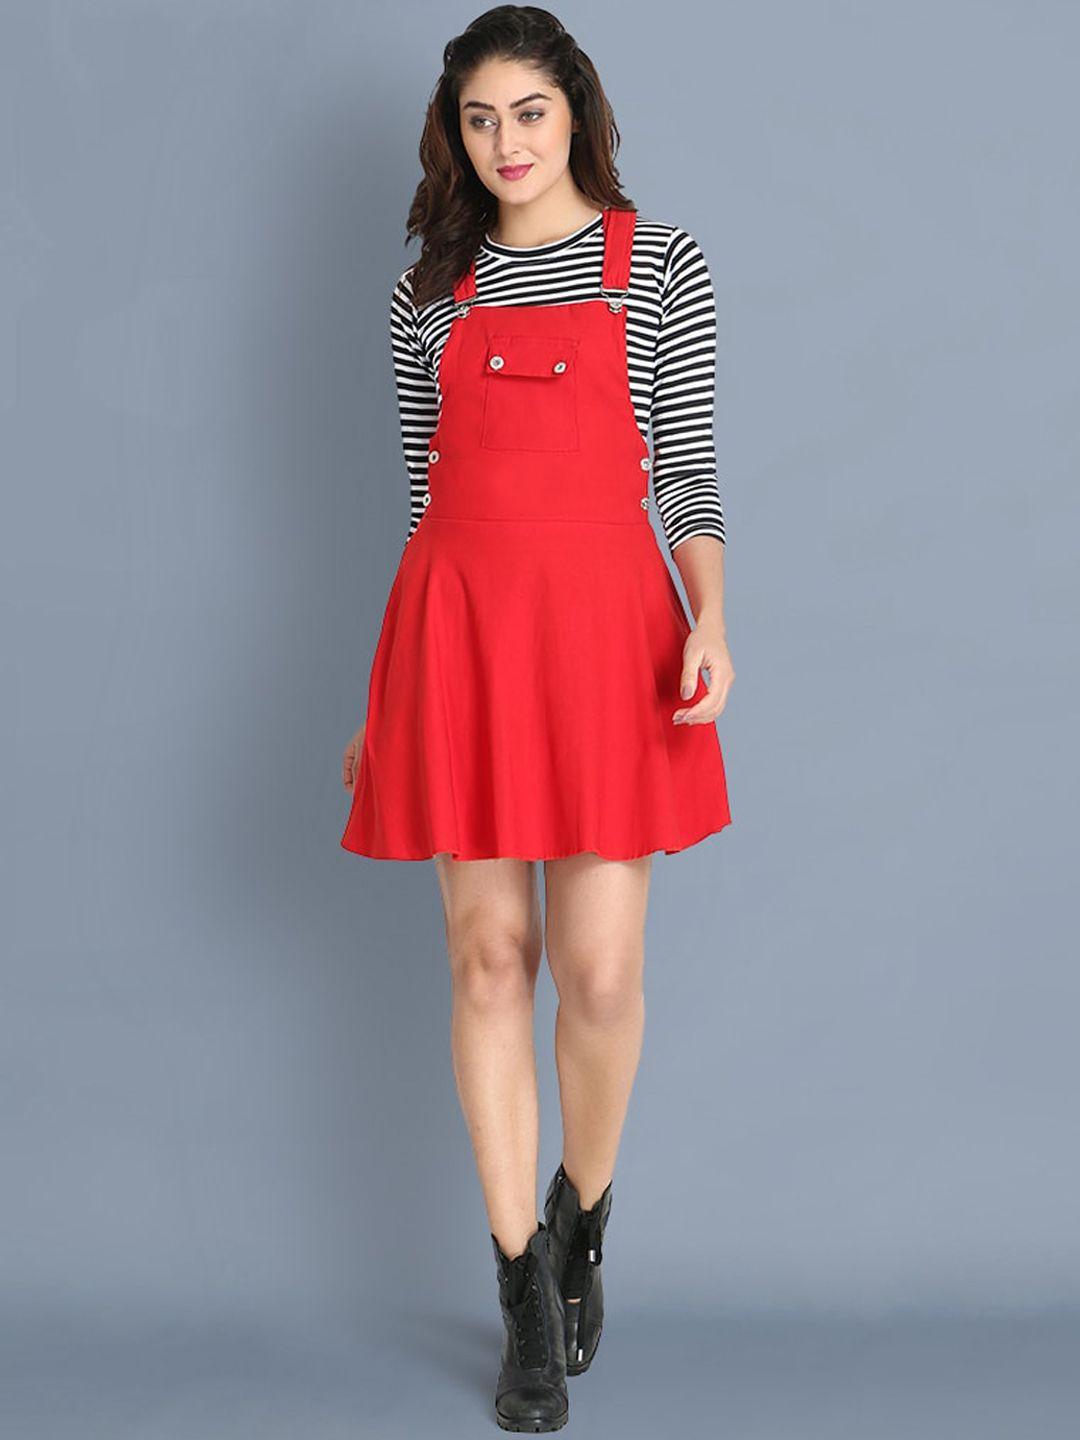 buy new trend women red & white solid cotton dungaree skirt with top